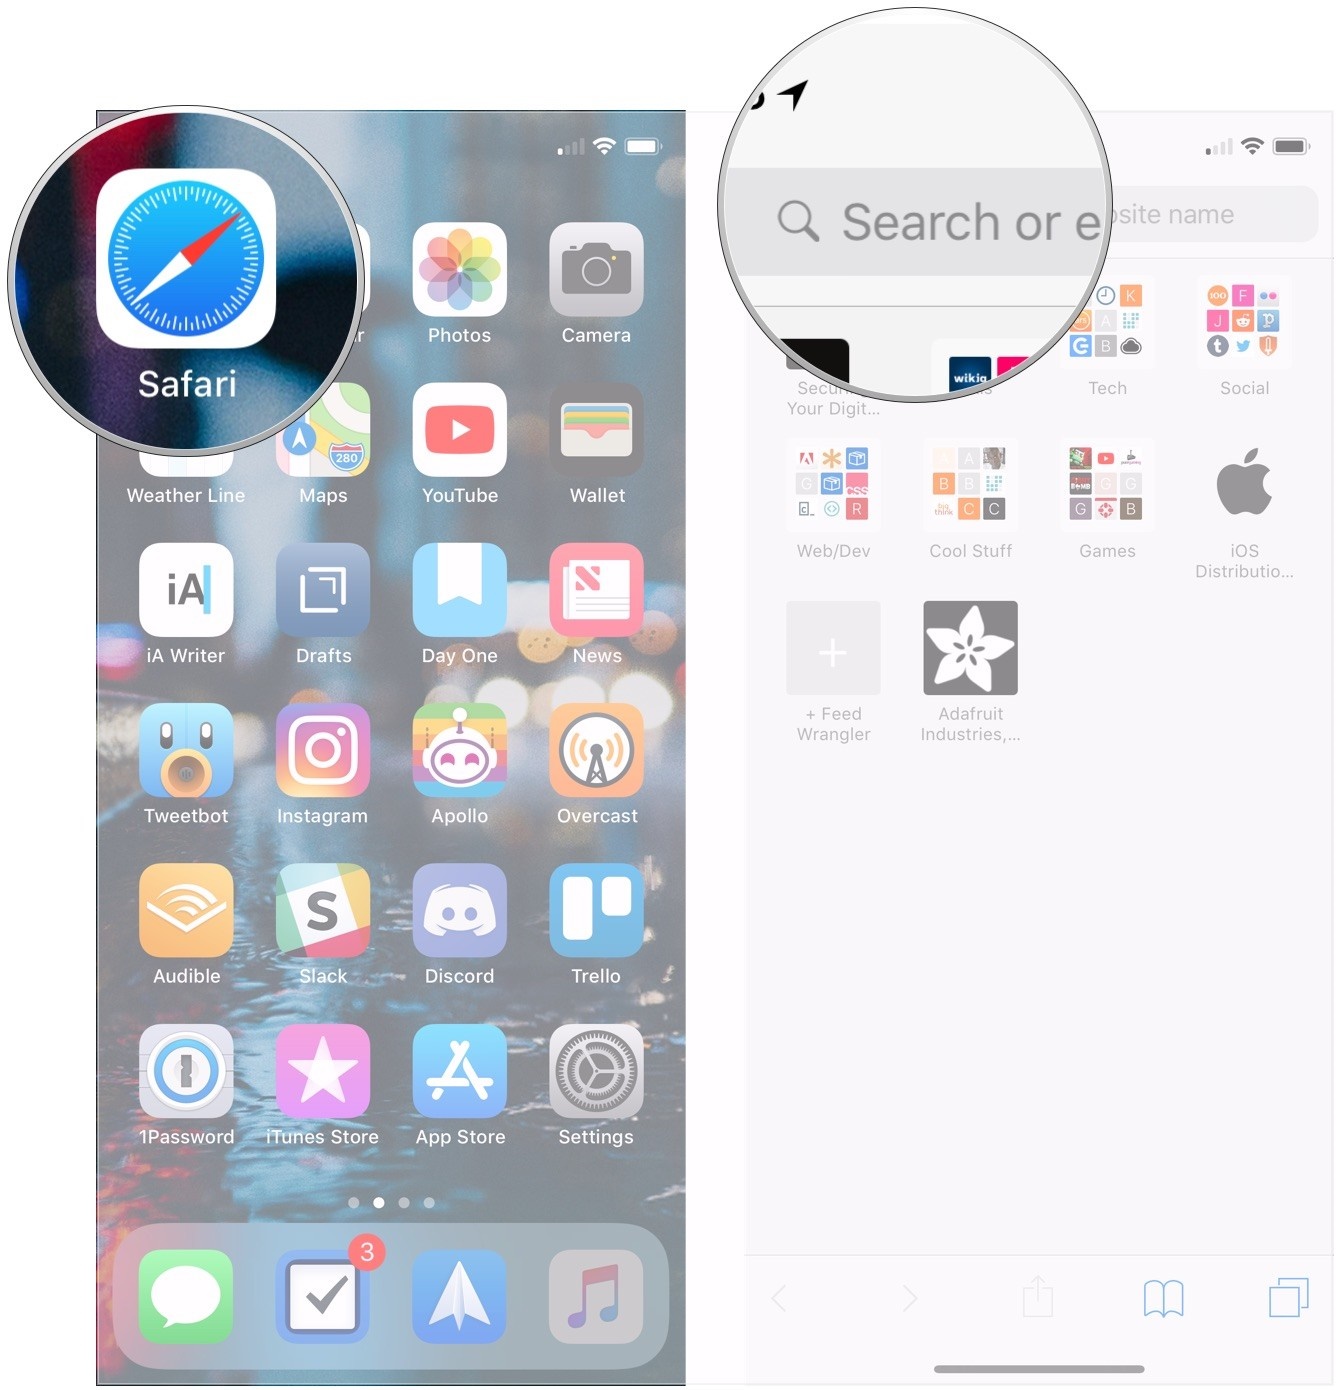 Search by image on iPhone with Safari